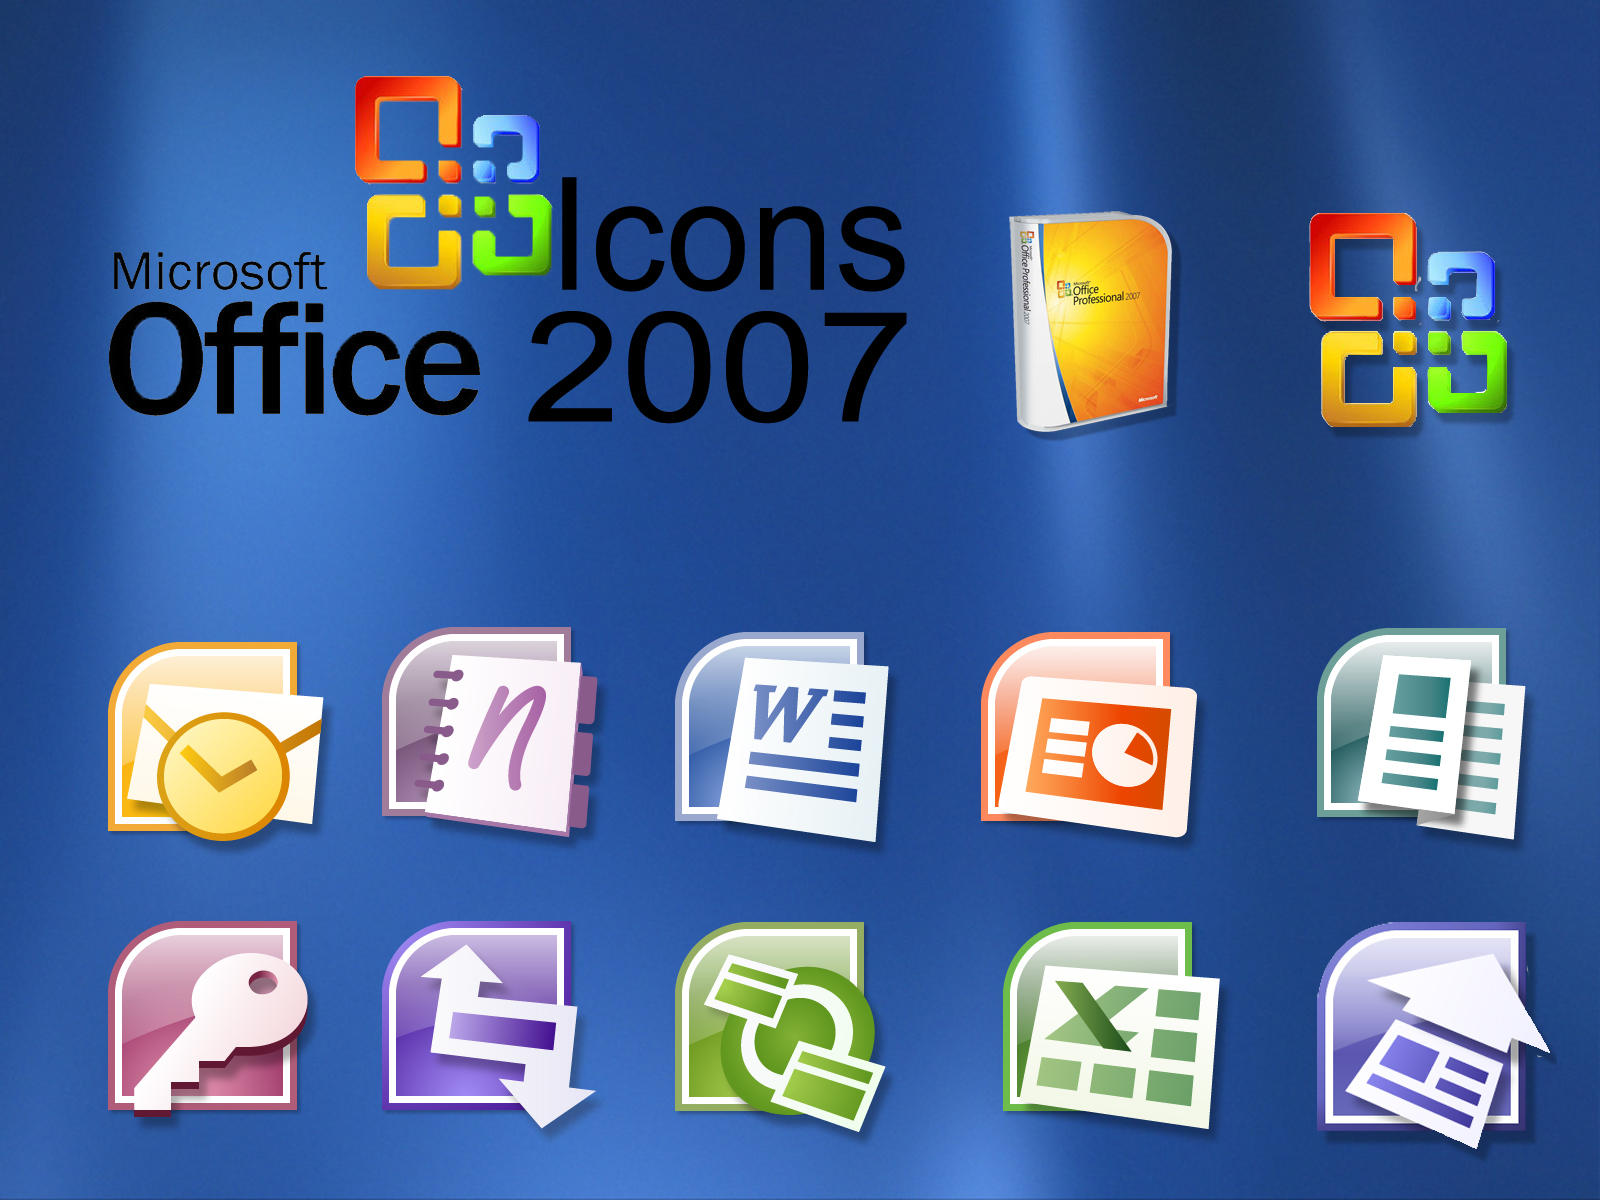 Office 2007 Icons By Kokej69 On Deviantart